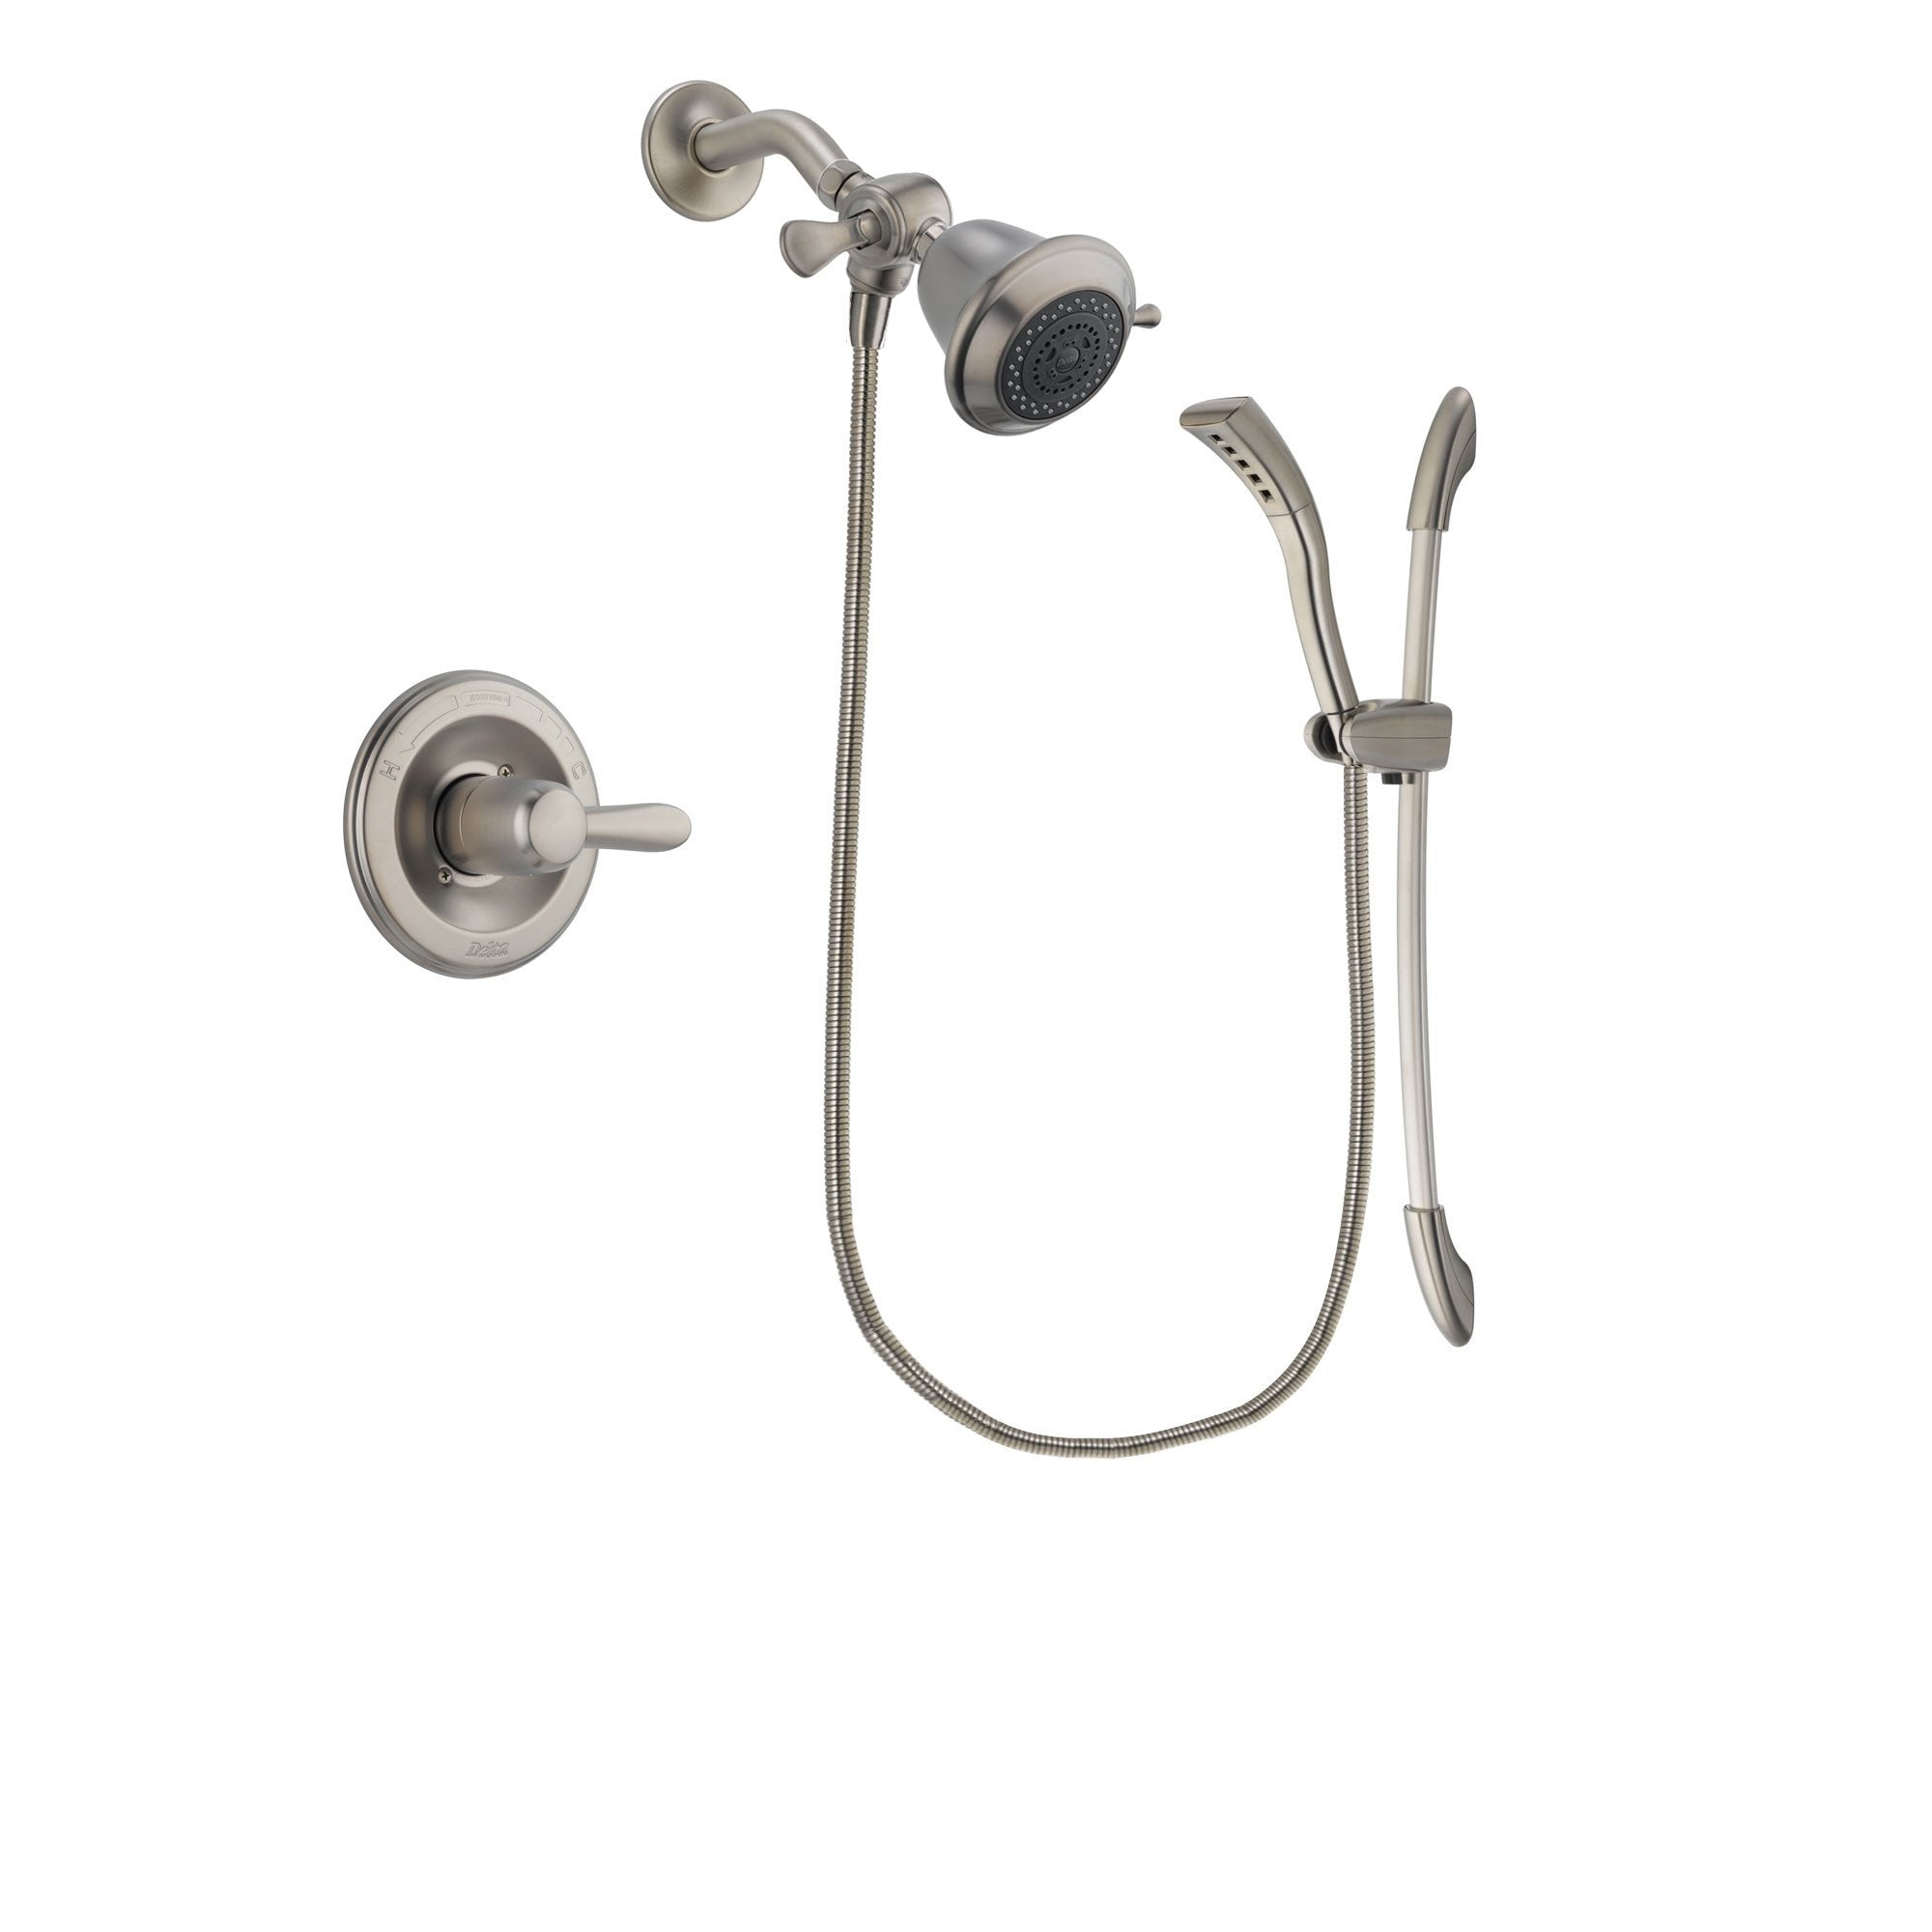 Delta Lahara Stainless Steel Finish Shower Faucet System Package with Shower Head and Handshower with Slide Bar Includes Rough-in Valve DSP1388V